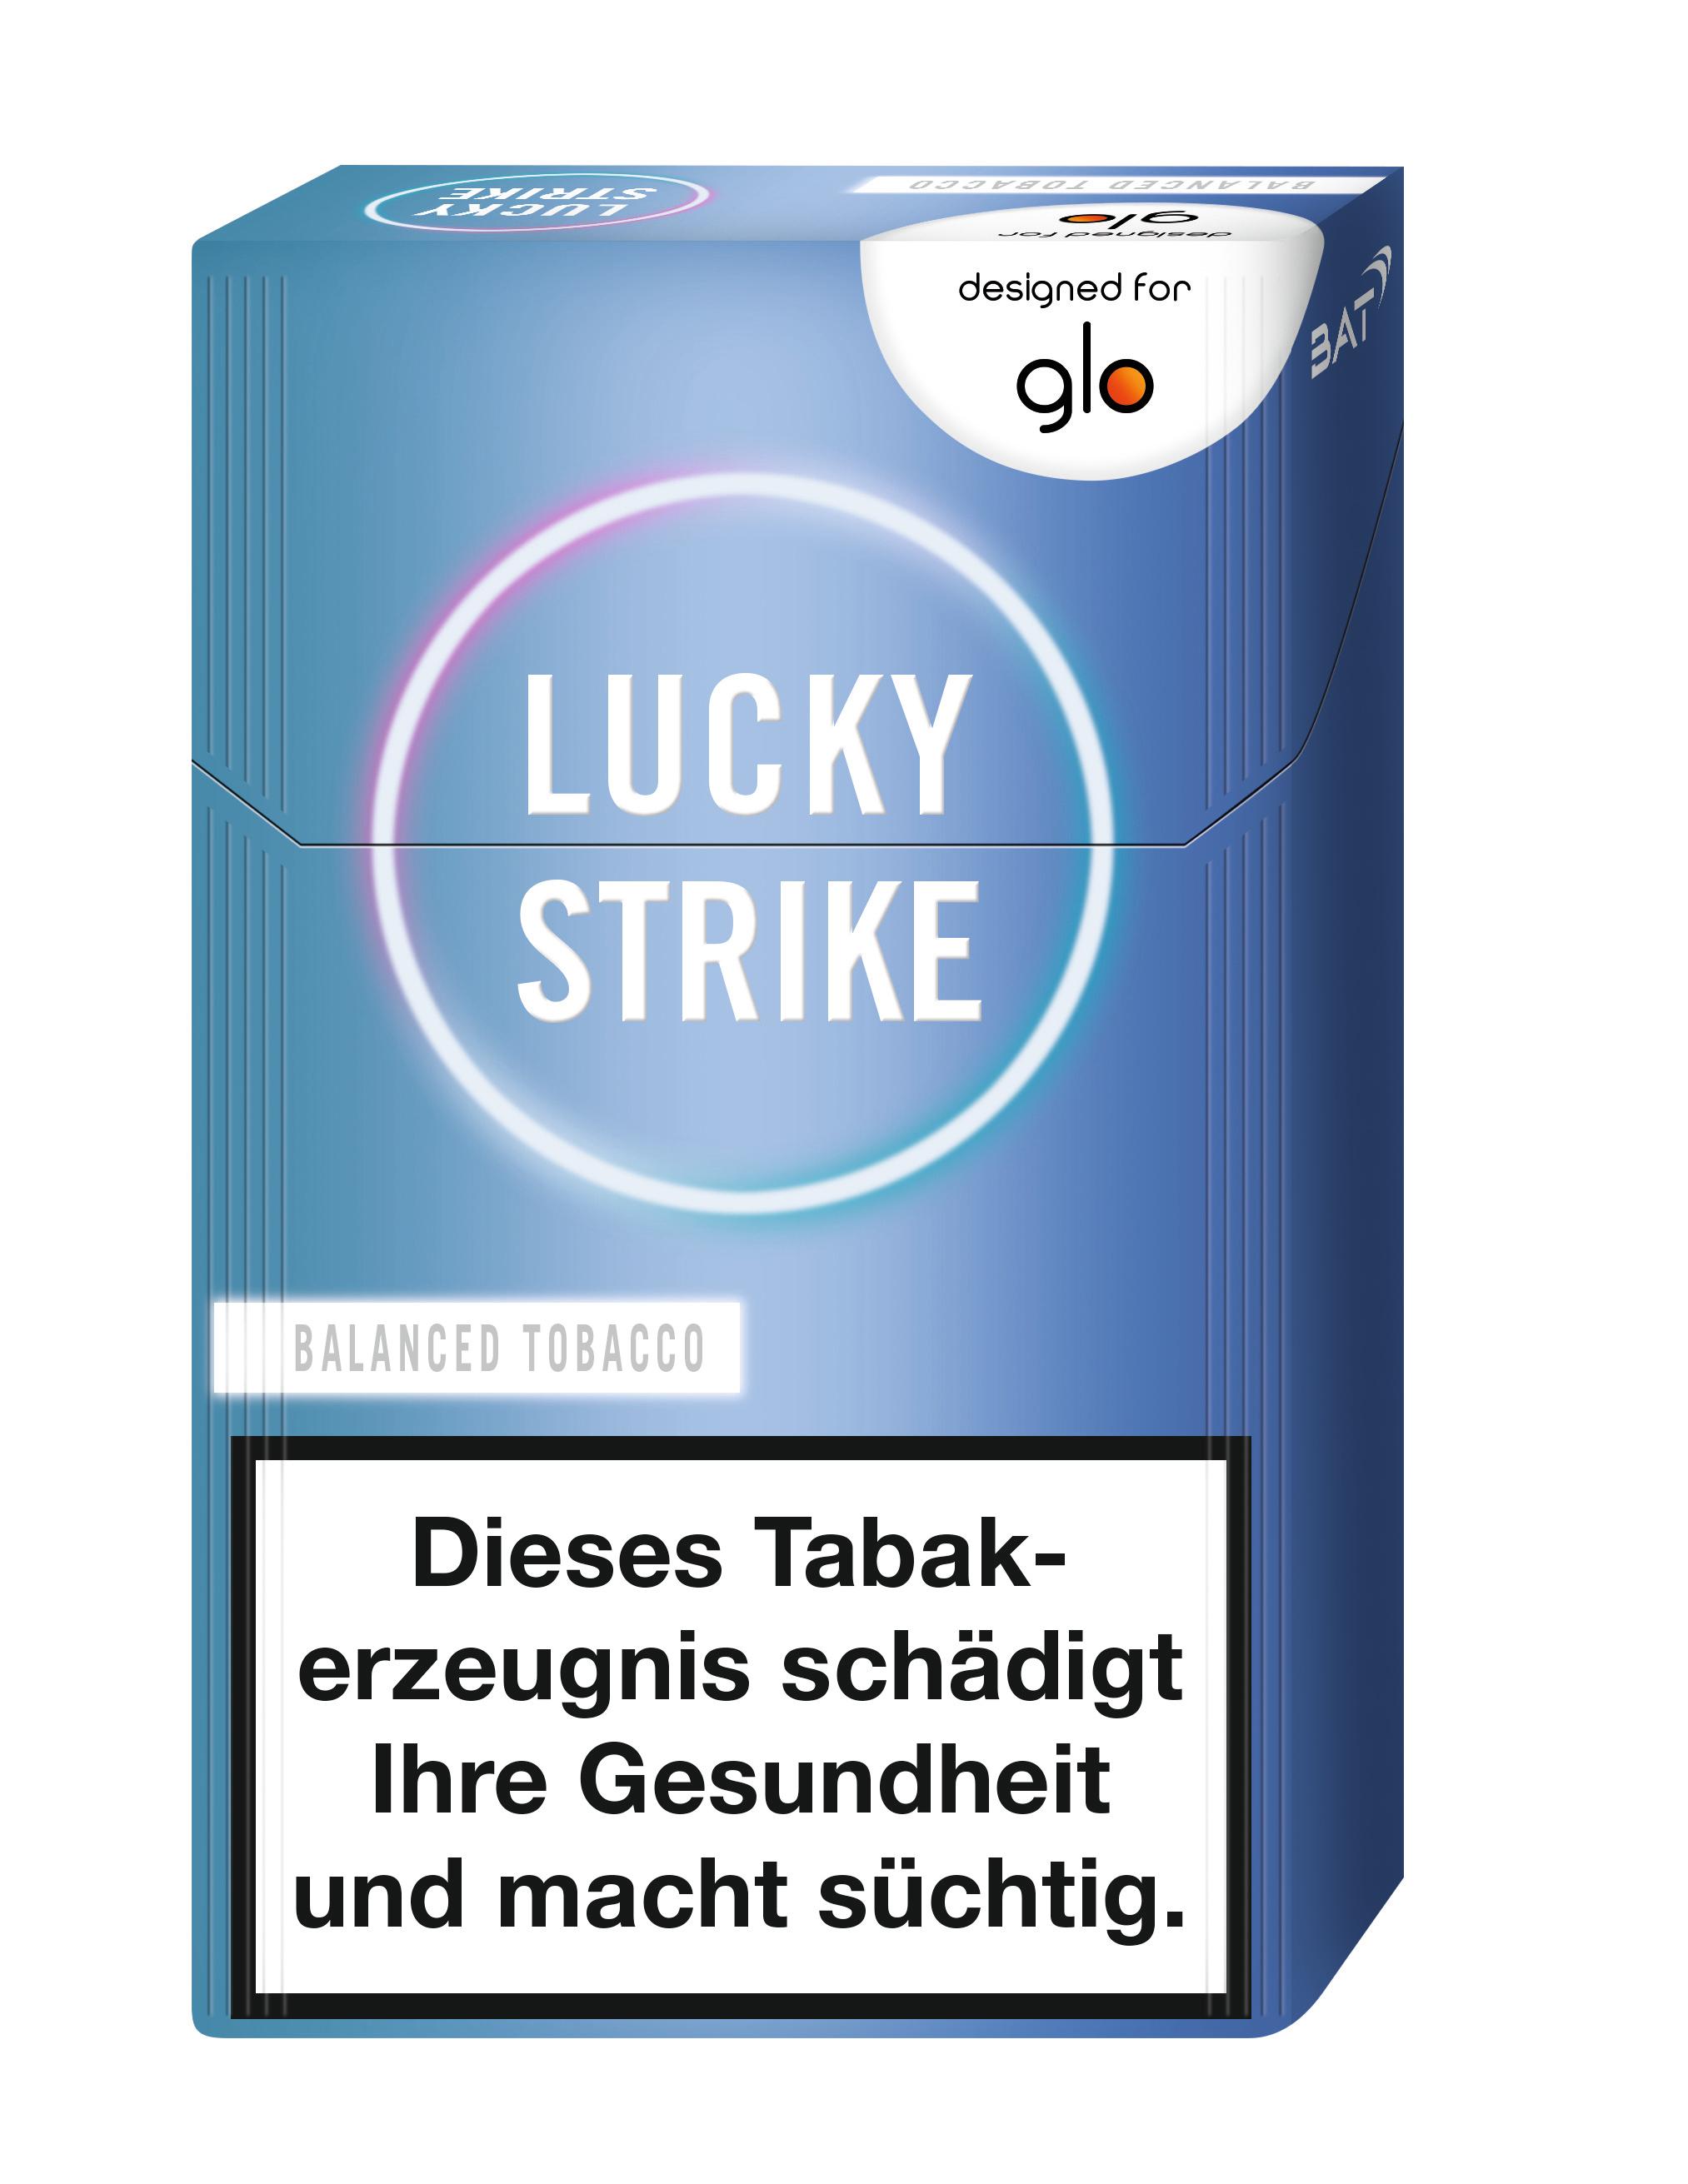 Lucky Strike for glo Balanced Tobacco 1 Packung